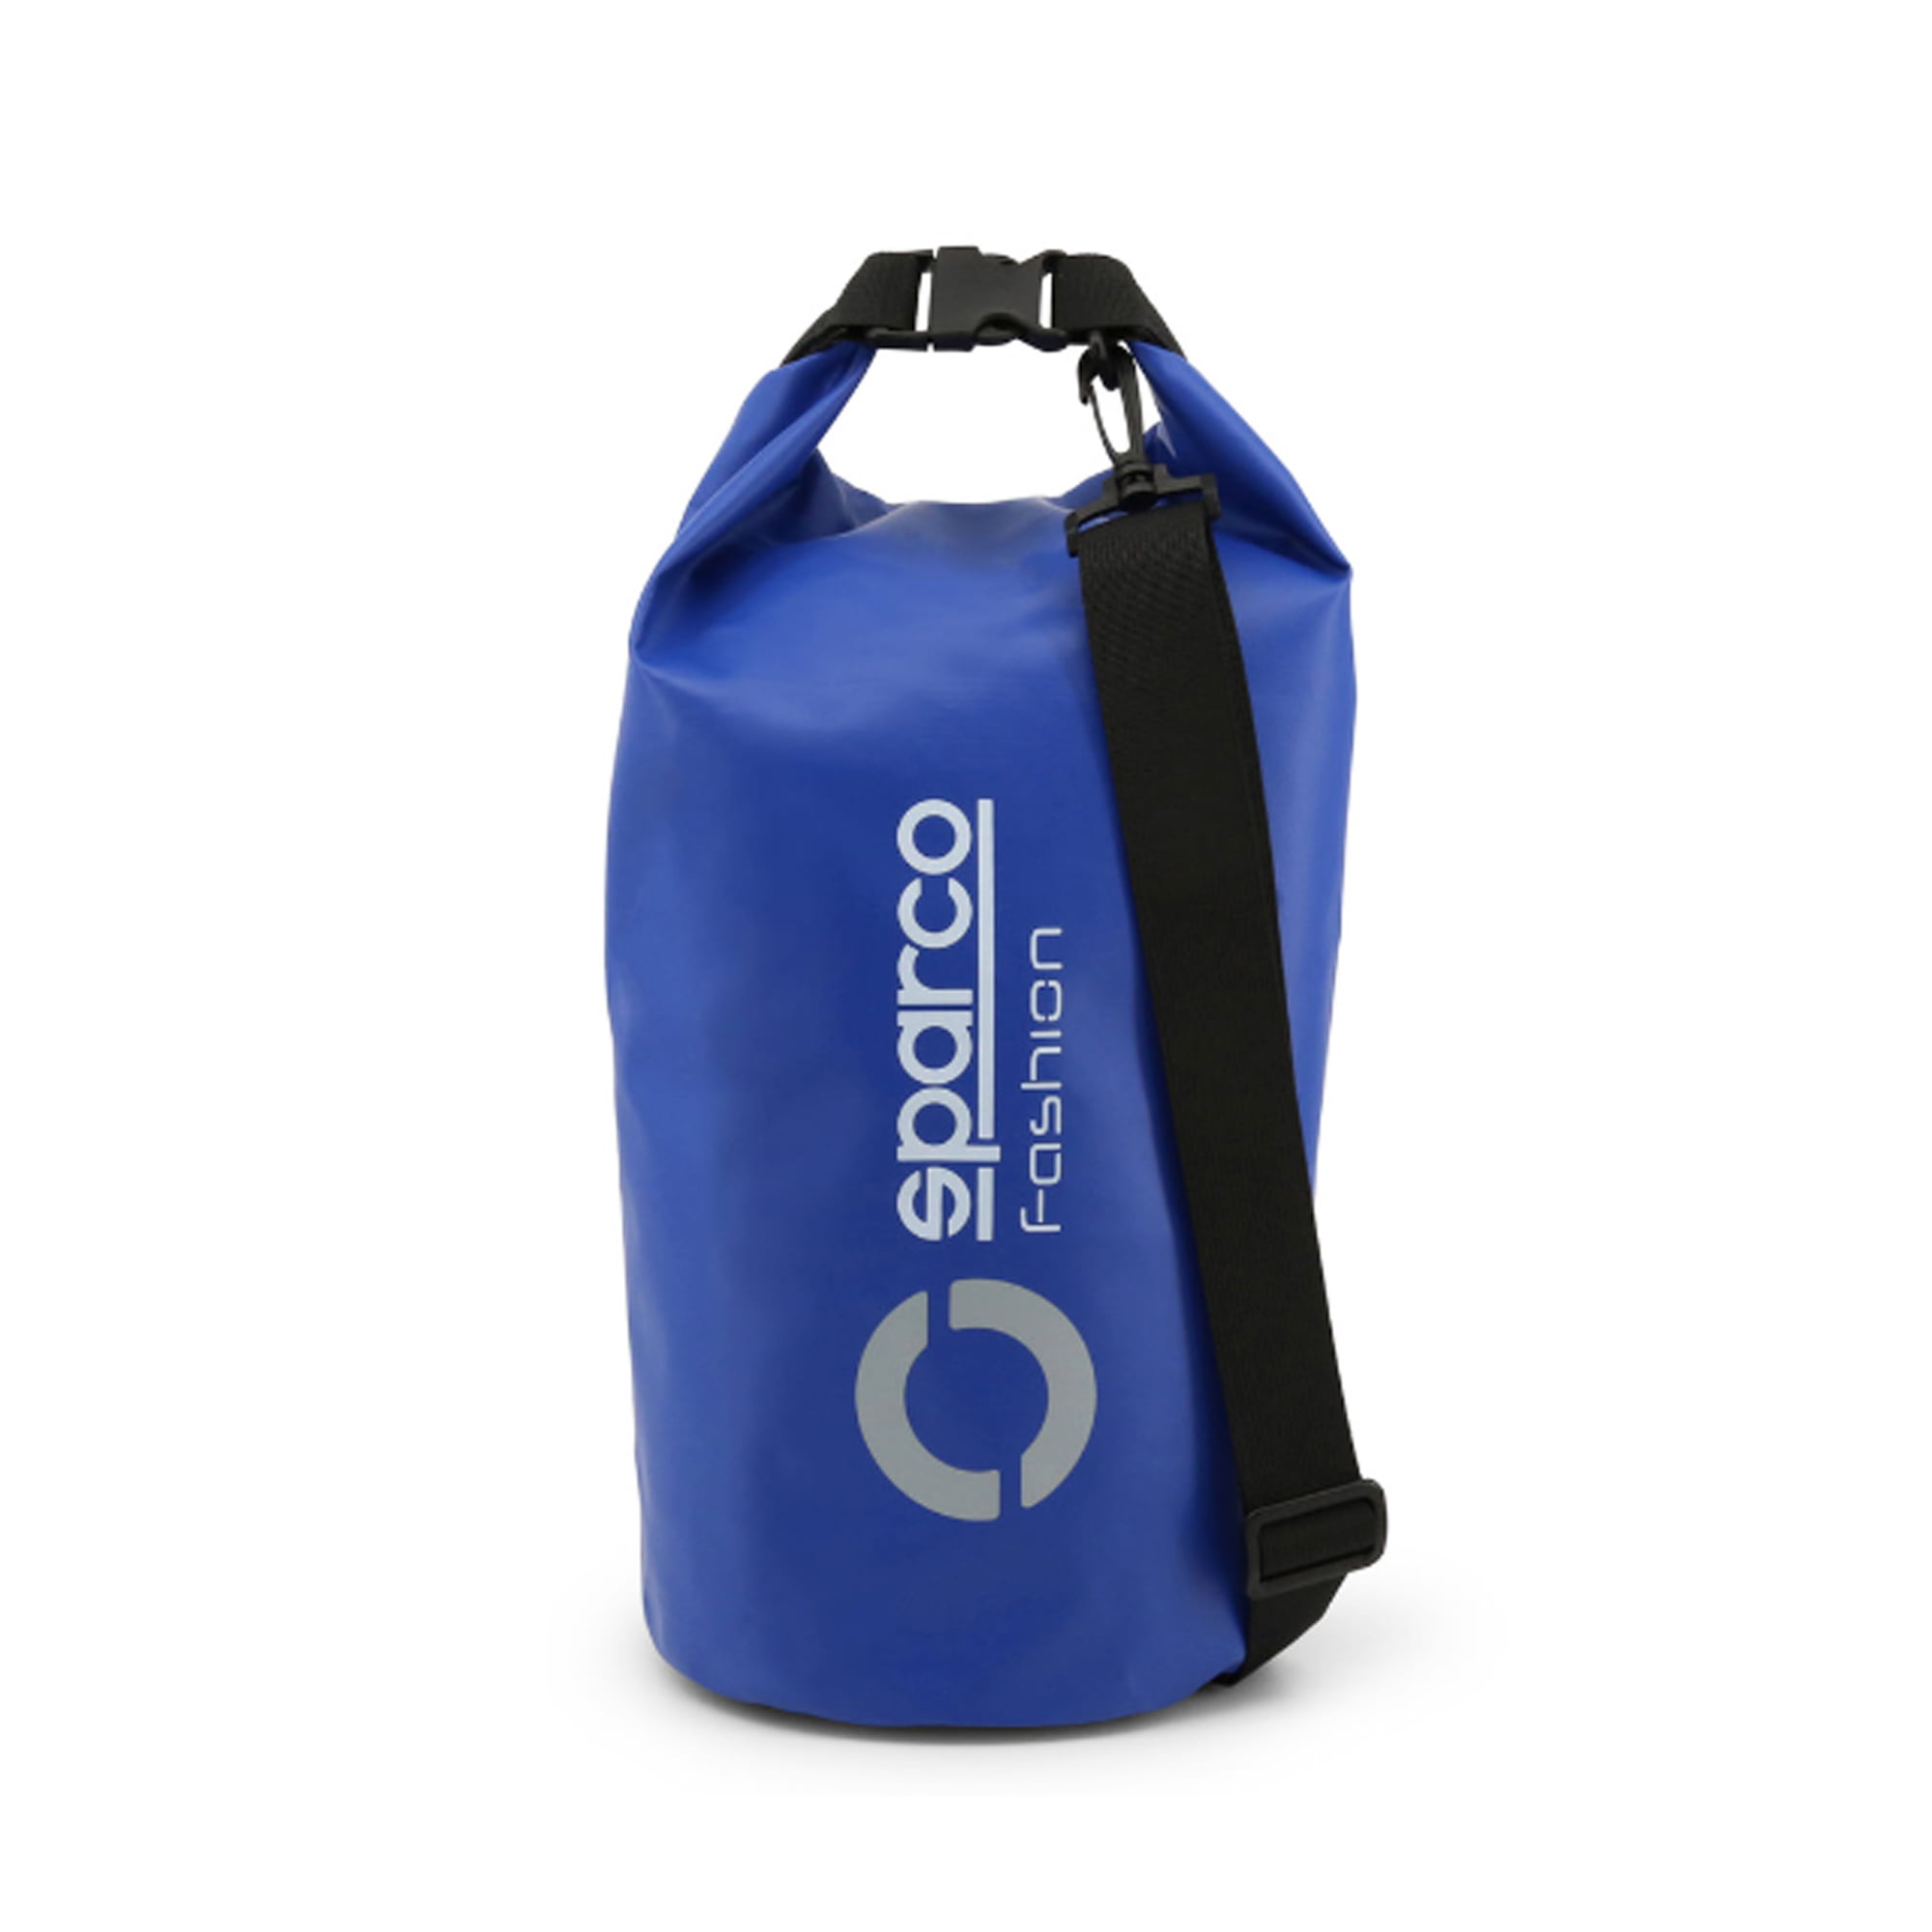 Becko 10L Dry Waterproof Bag Includes Shoulder Strap for Swimming 